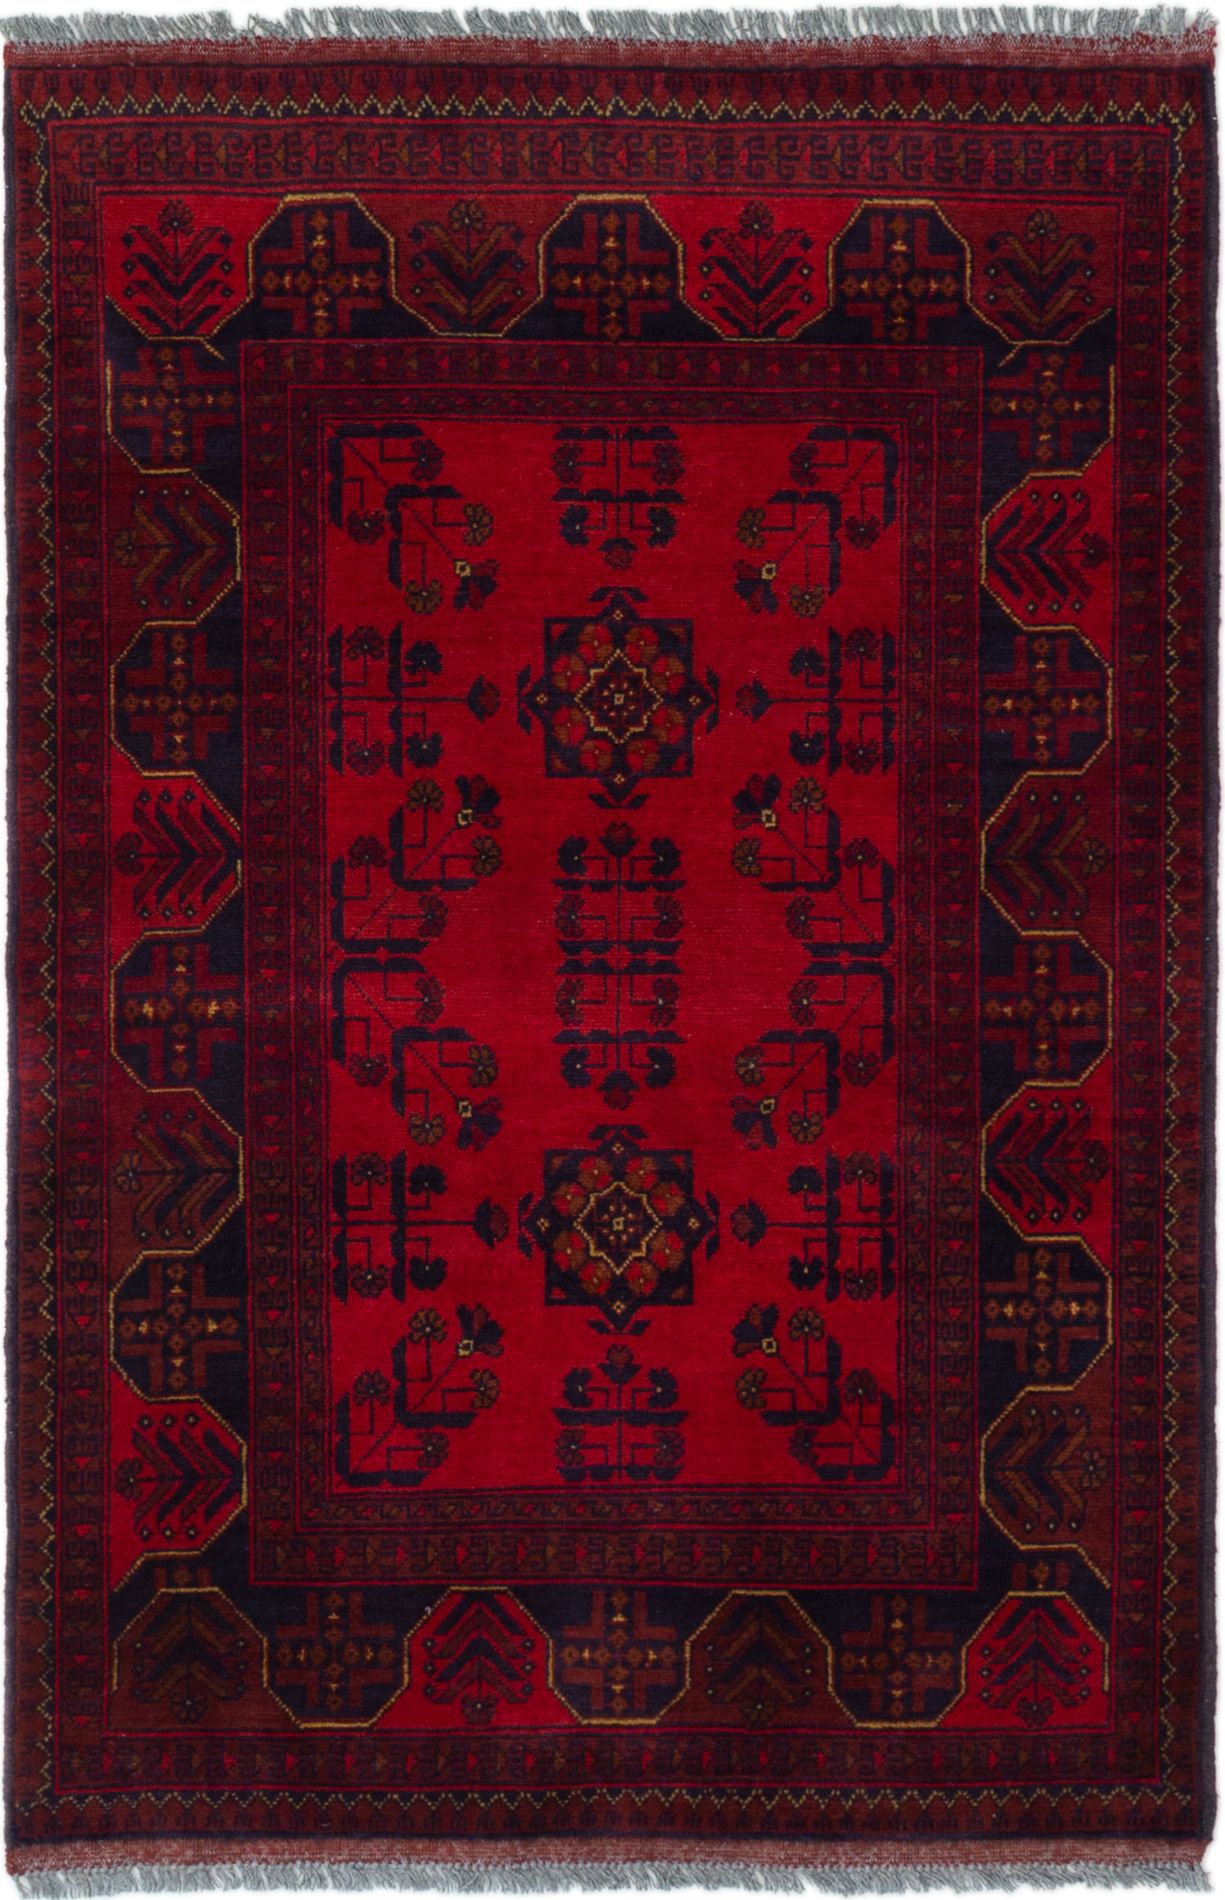 Hand-knotted Finest Khal Mohammadi Red Wool Rug 3'3" x 5'0" (36) Size: 3'3" x 5'0"  